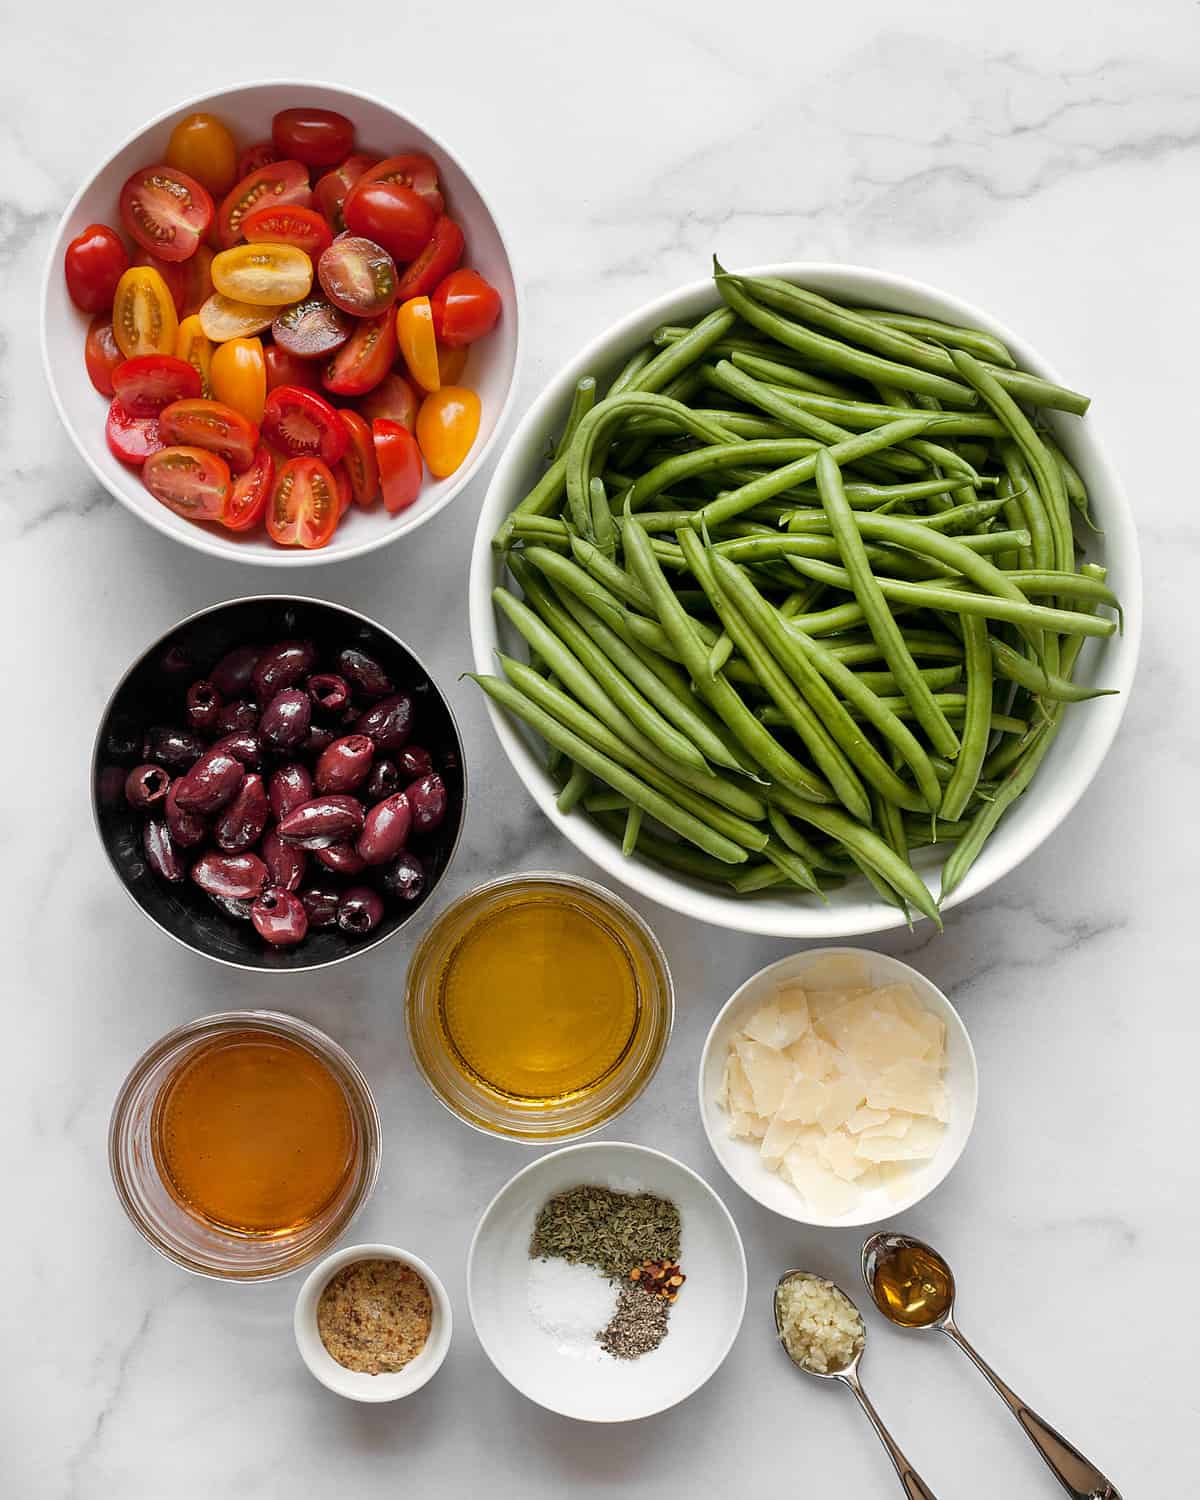 Ingredients including green beans, tomatoes, olives, parmesan, red wine vinegar, mustard, garlic and scallions.